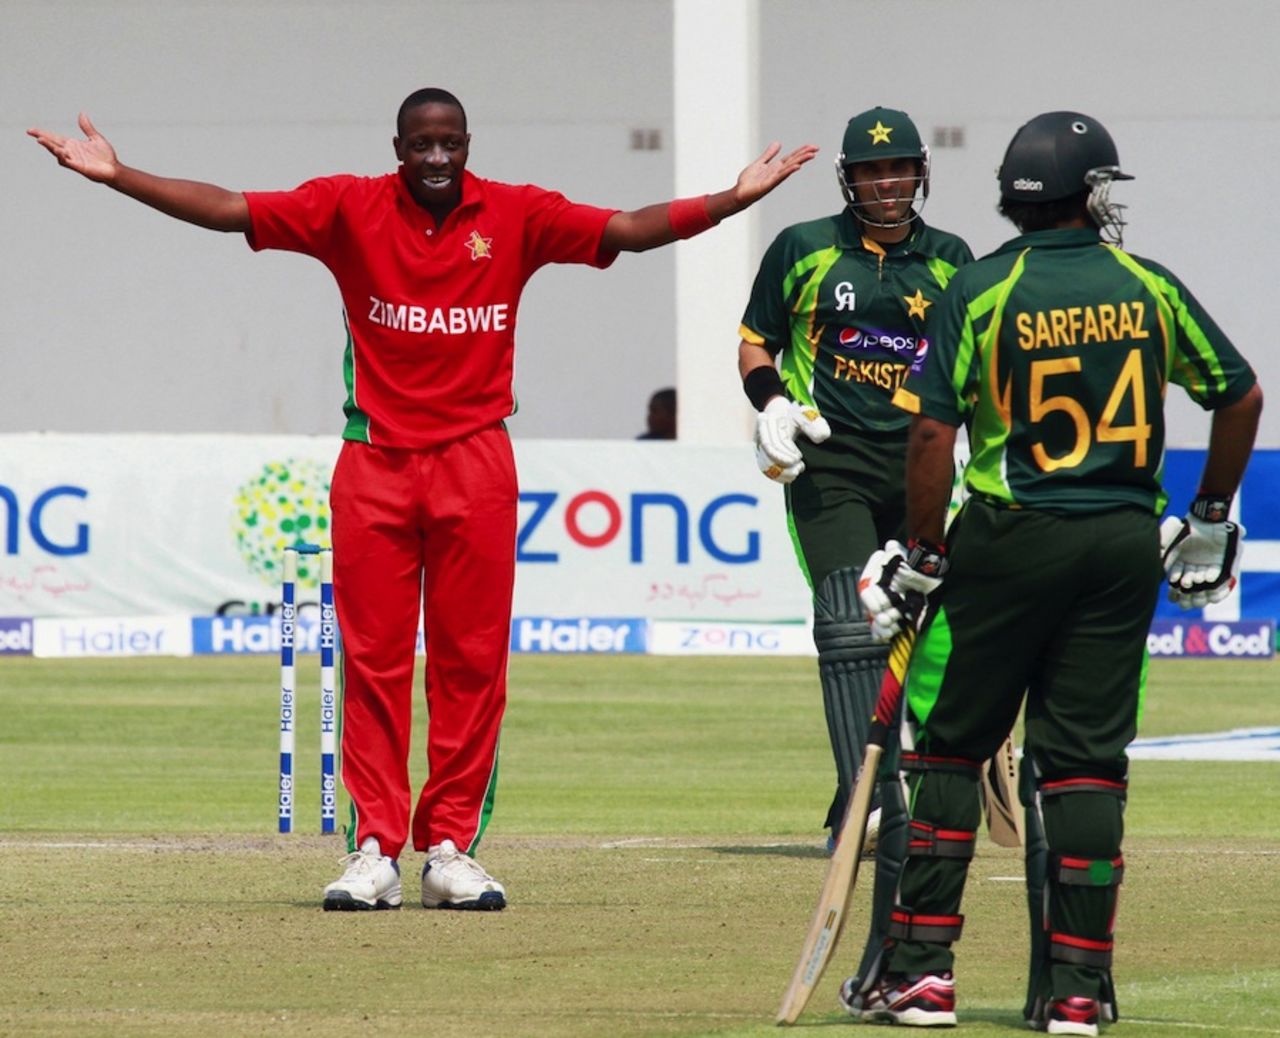 Shingi Masakadza appeals after Sarfraz Ahmed changed his course while running to obstruct the field, Zimbabwe v Pakistan, 3rd ODI, Harare, August 31, 2013